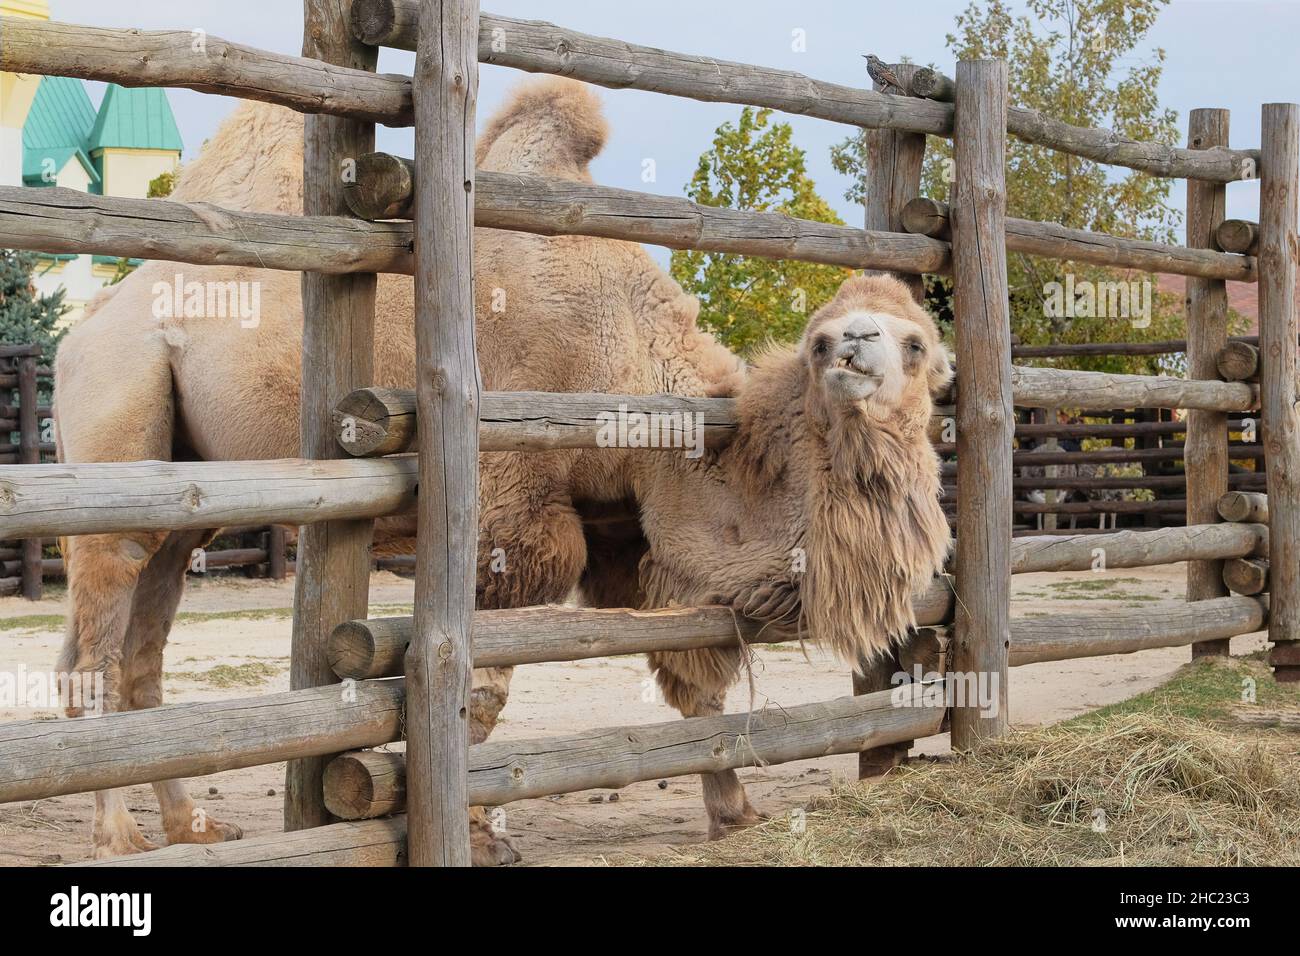 Camel eating hay at the zoo, close up. Camels can survive for long periods without food or drink, chiefly by using up the fat reserves in their humps. Stock Photo